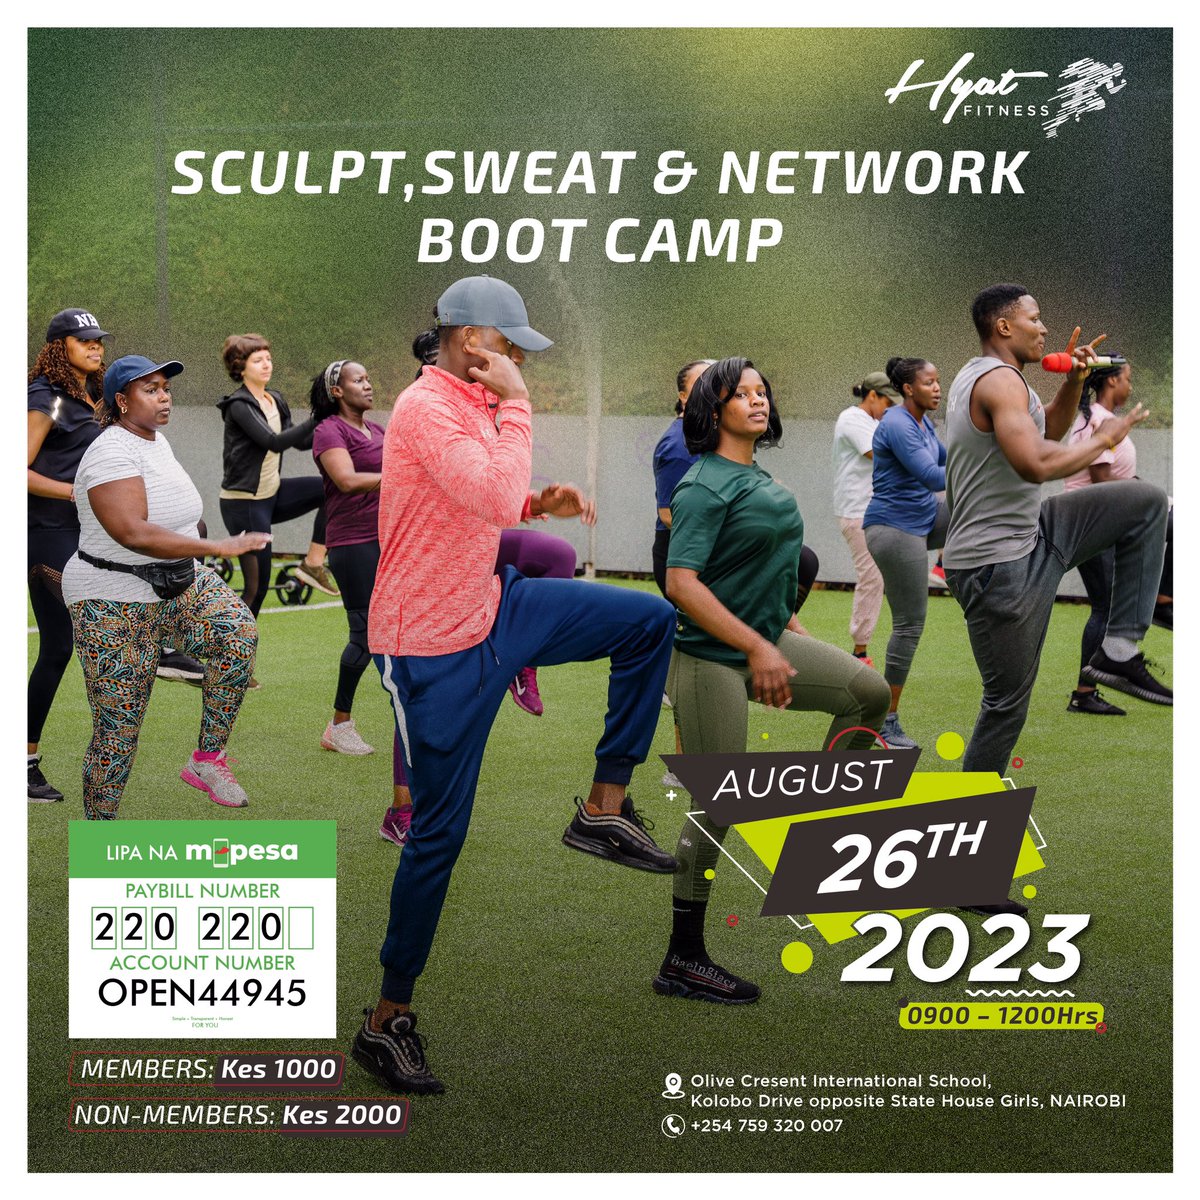 Secure your spot now by getting your ticket for an Electrifying Weekend Experience!

#bootcamp #tickets #fitnessaddict #FitnessGoals #fungettingfit  #networkingplatform #aerobicsclass #taeboclass #dancefitness #olivecresent #hyatfitness